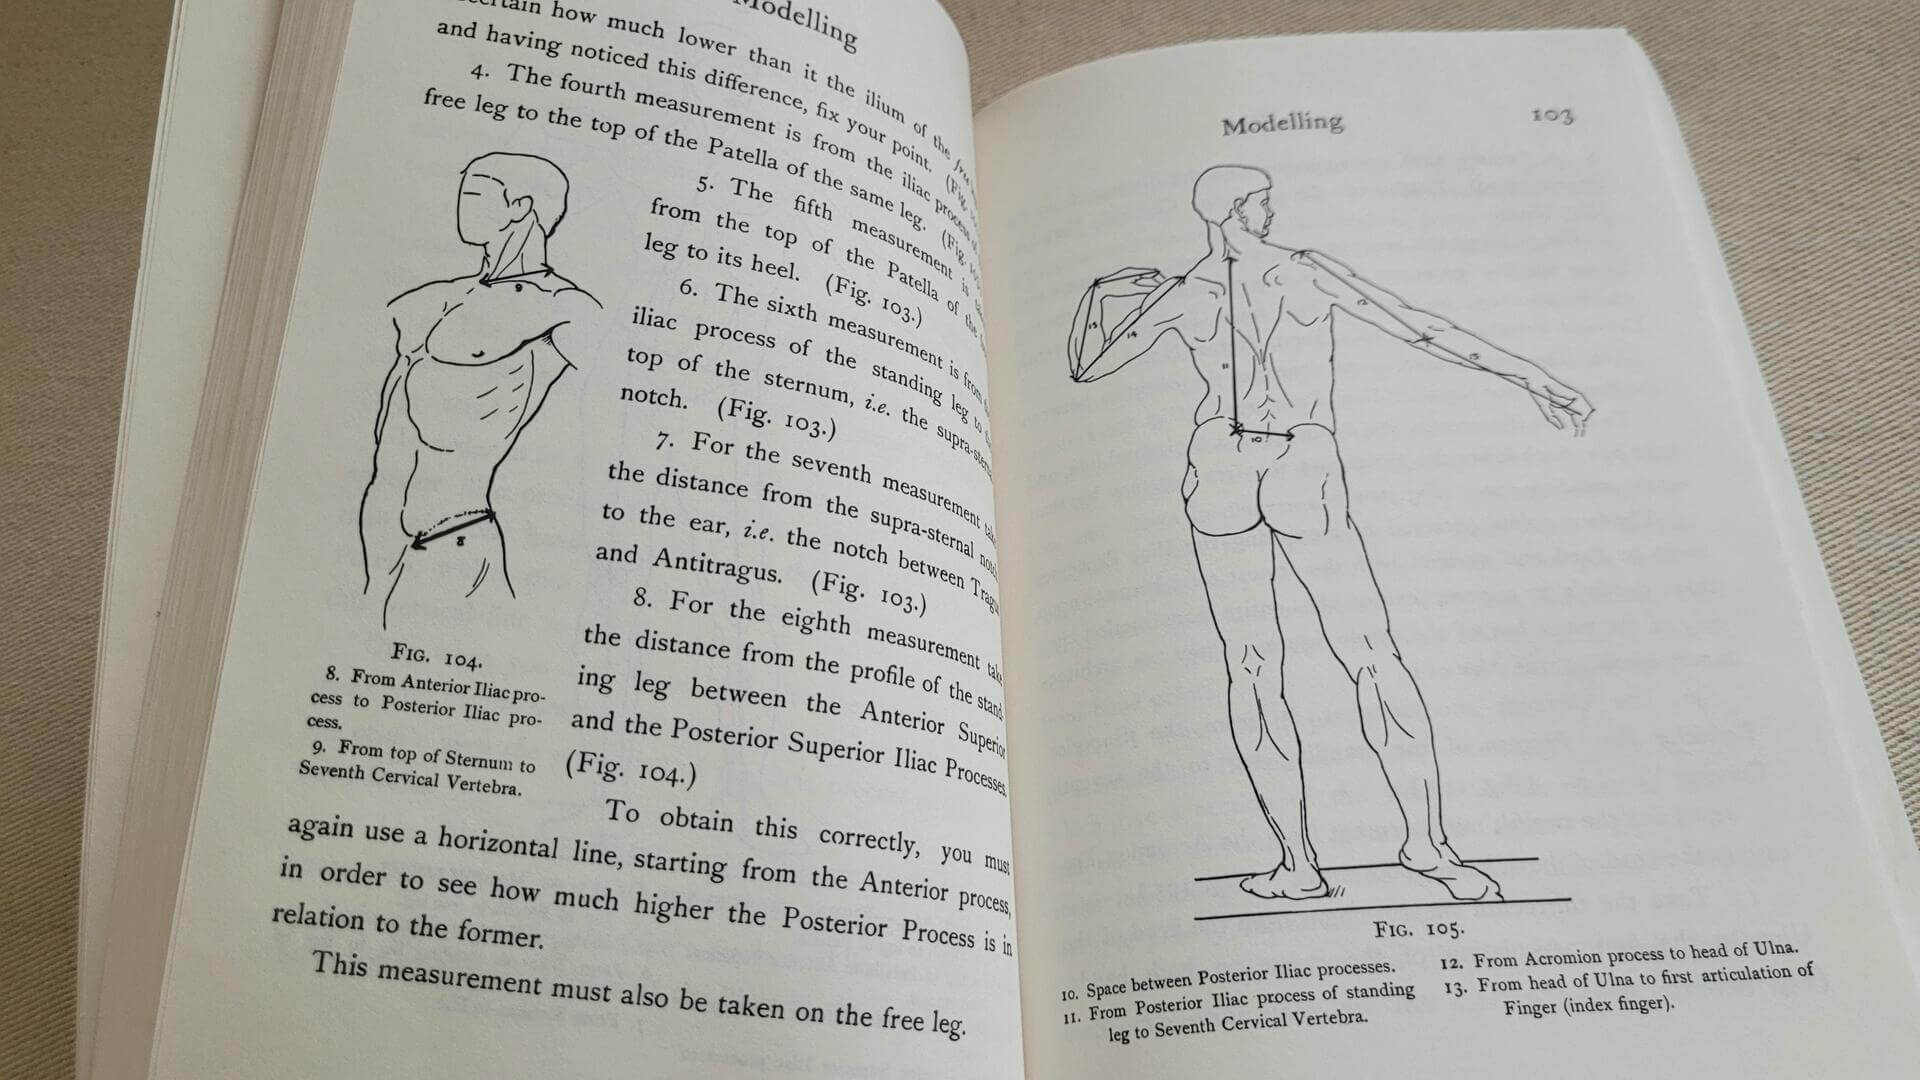 modelling-and-sculpting-the-human-figure-book-by-edouard-lanteri-1985-dover-publications-ISBN-10-0486250067-contents-view-3